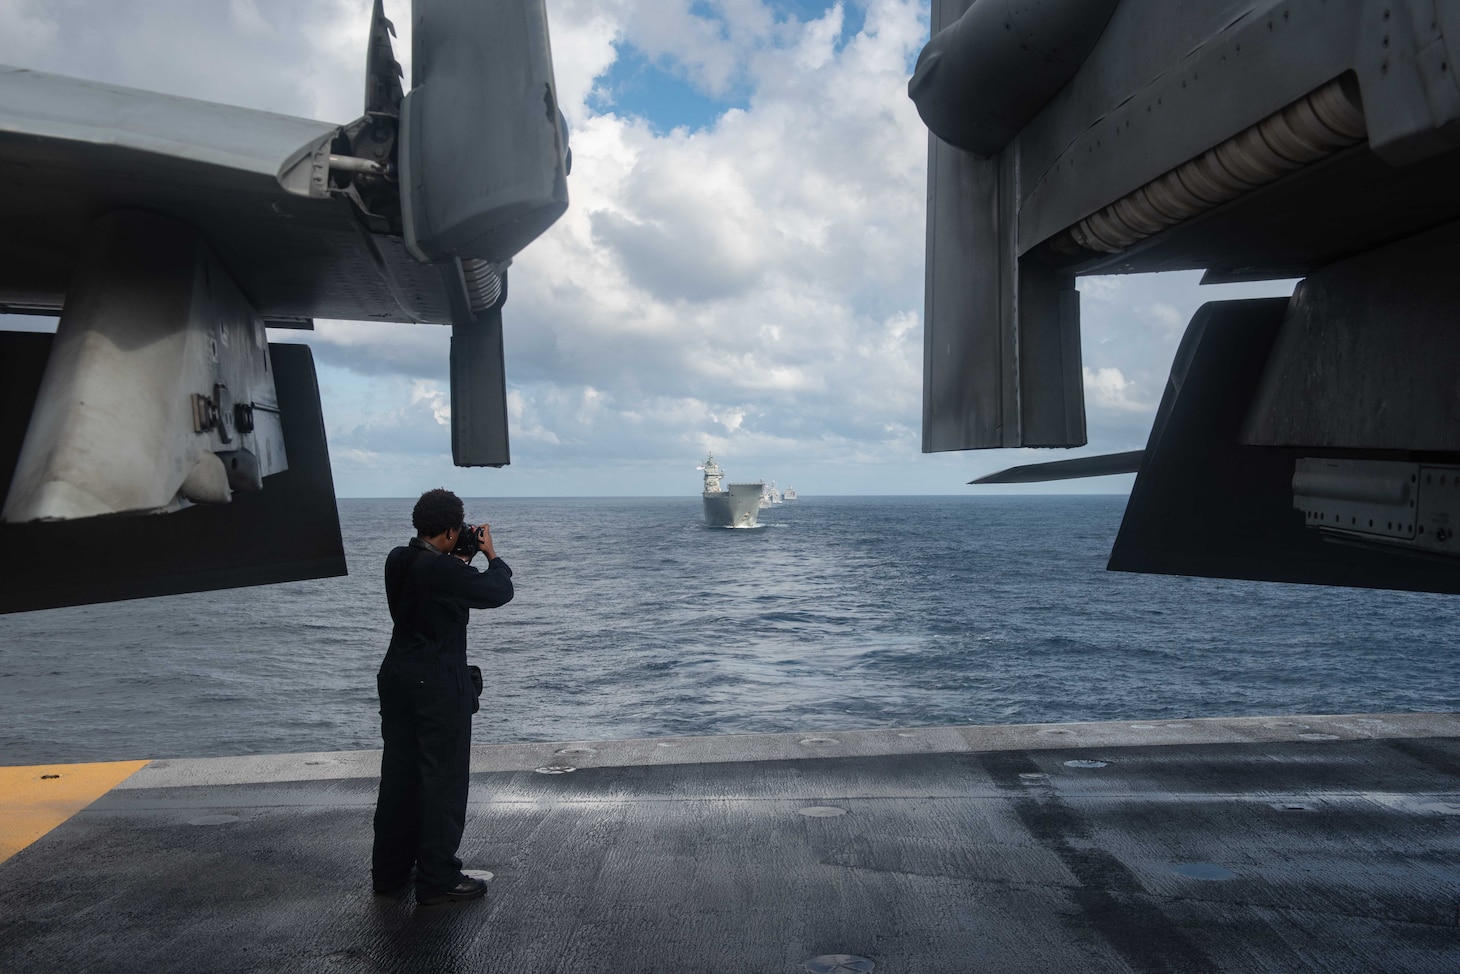 CORAL SEA (July 11, 2019) Mass Communication Specialist 2nd Class Tyra Campbell, from Philadelphia, photographs the Royal Australian Navy’s HMAS Canberra (L 02), as they sail in formation during Talisman Sabre 2019 on the flight deck of the Navy’s forward-deployed aircraft carrier USS Ronald Reagan (CVN 76). Talisman Sabre 2019 illustrates the closeness of the Australian and U.S. alliance and the strength of the military-to-military relationship. This is the eighth iteration of this exercise.